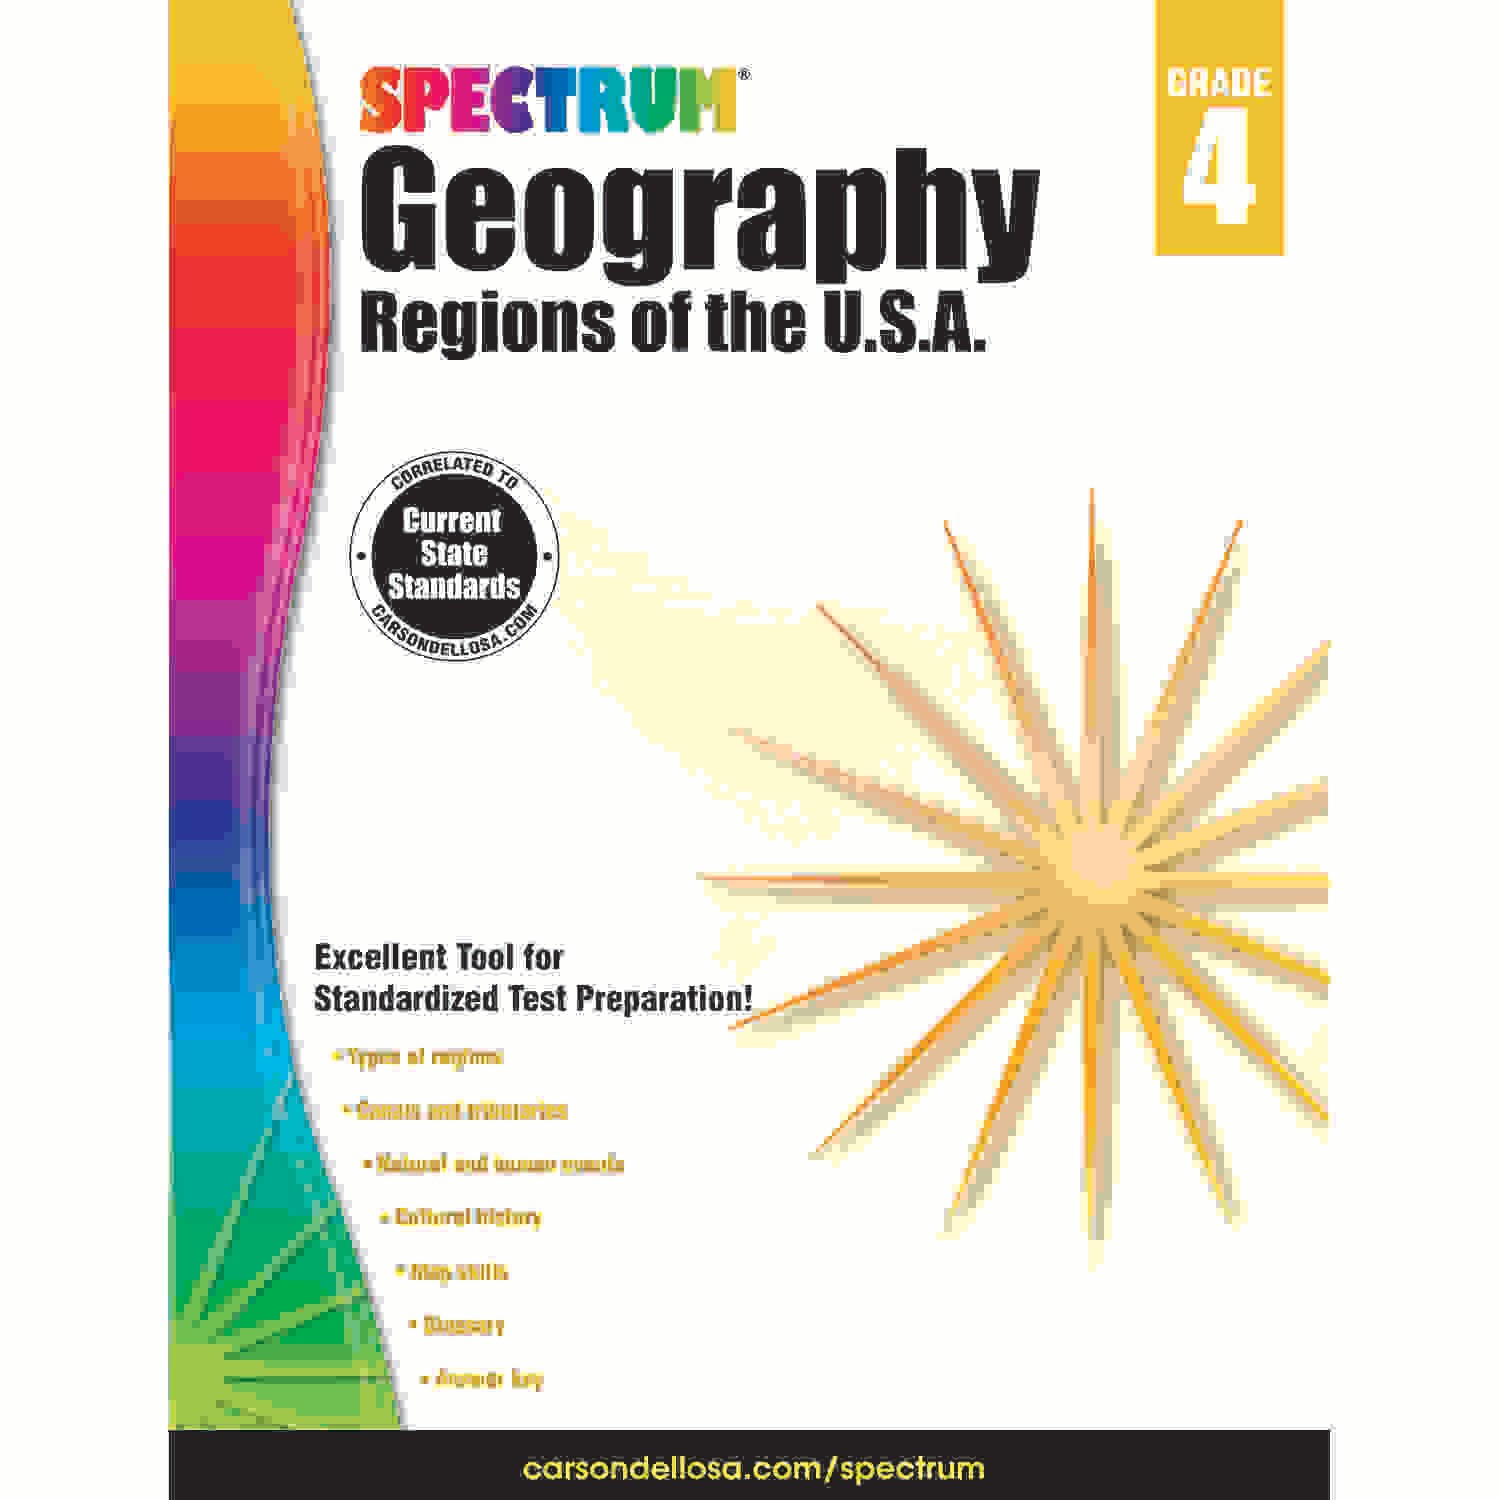 Spectrum Geography: Regions of the U.S.A., Grade 4